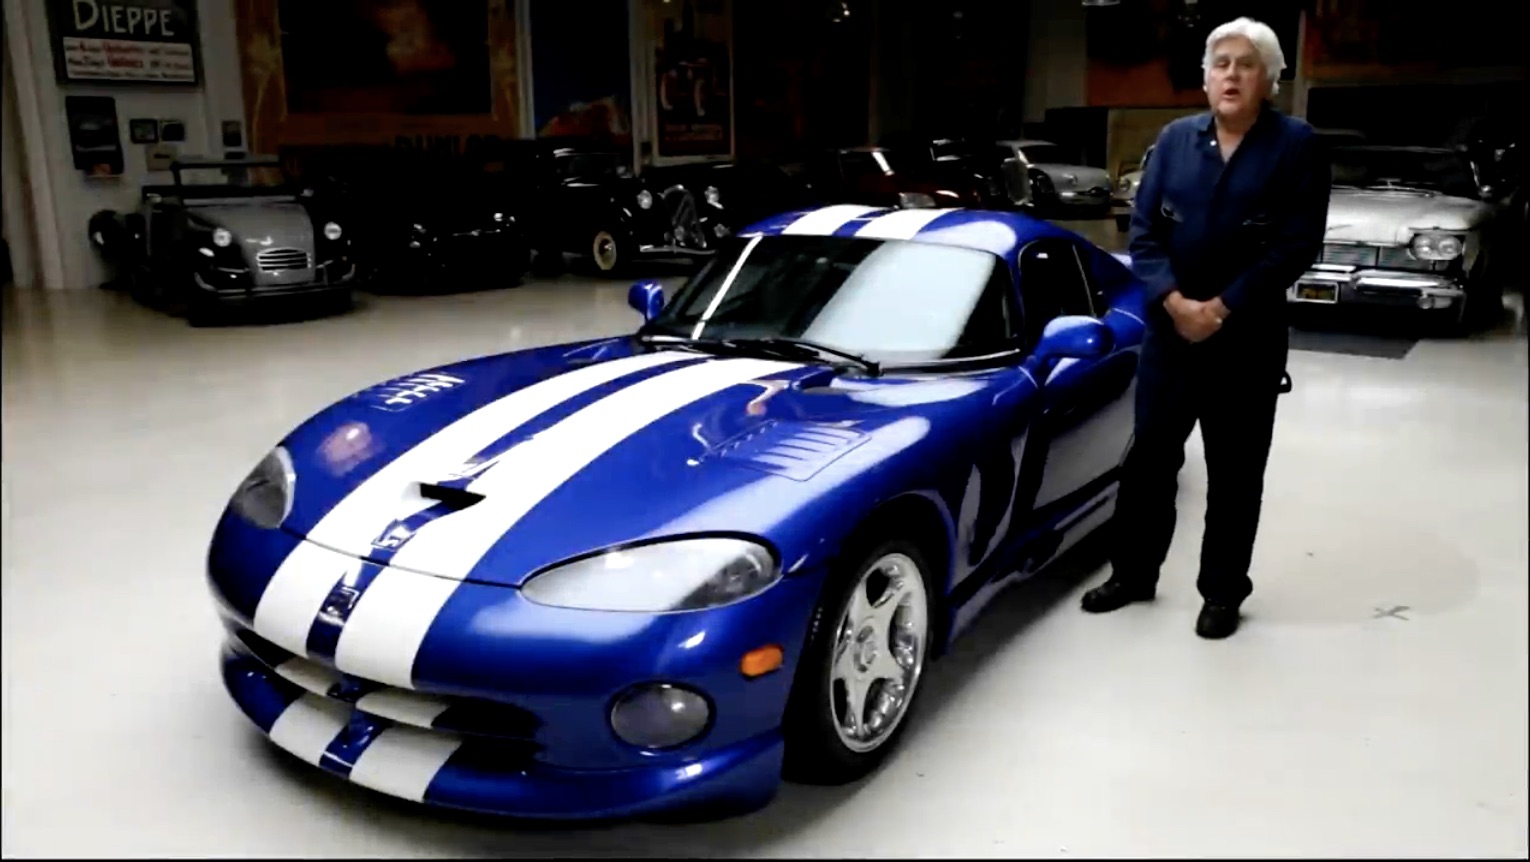 America’s Sweetheart: Leno Shows Off His 1996 Viper GTS